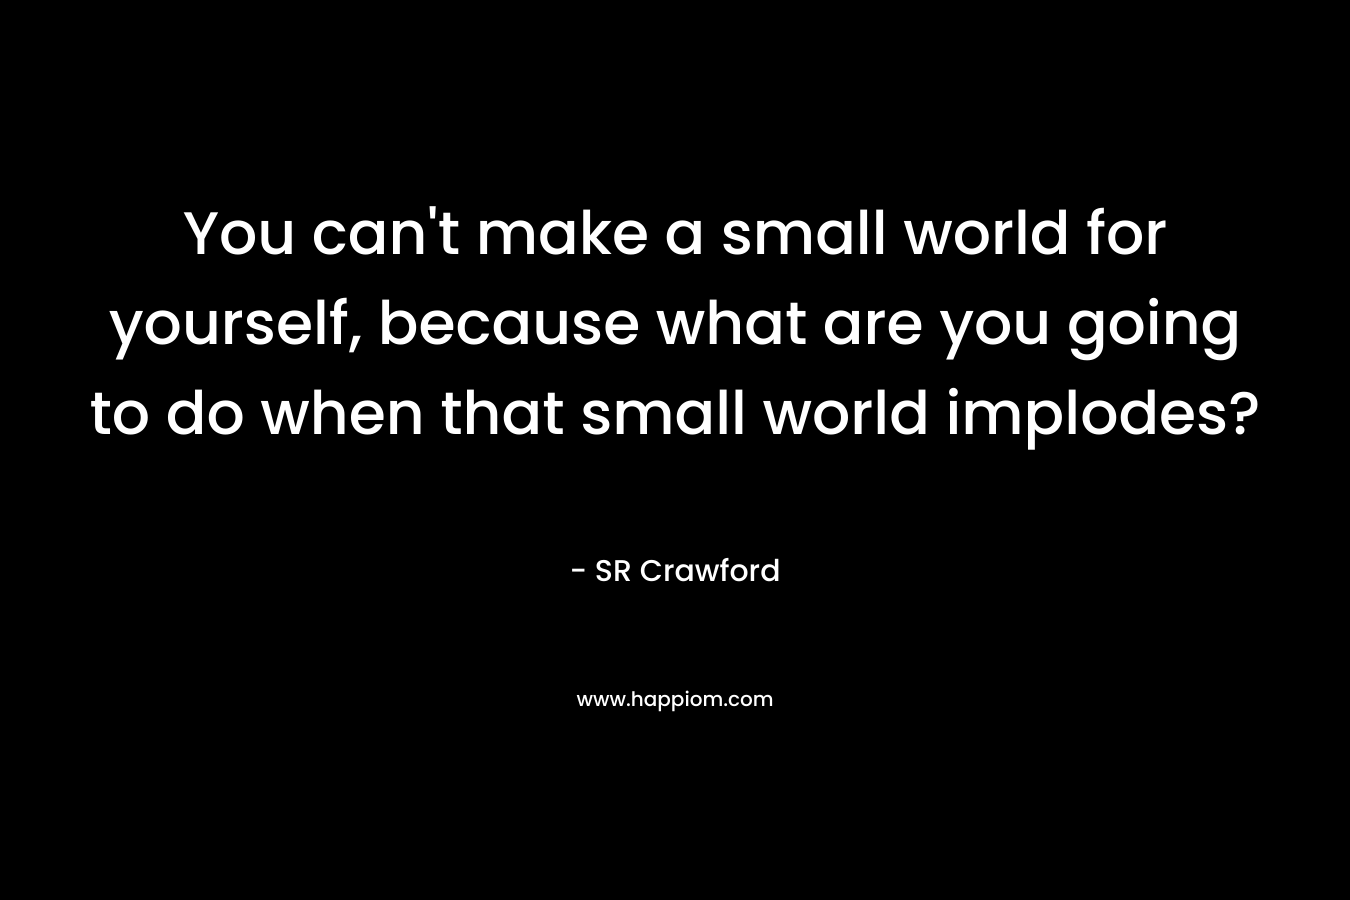 You can’t make a small world for yourself, because what are you going to do when that small world implodes? – SR Crawford